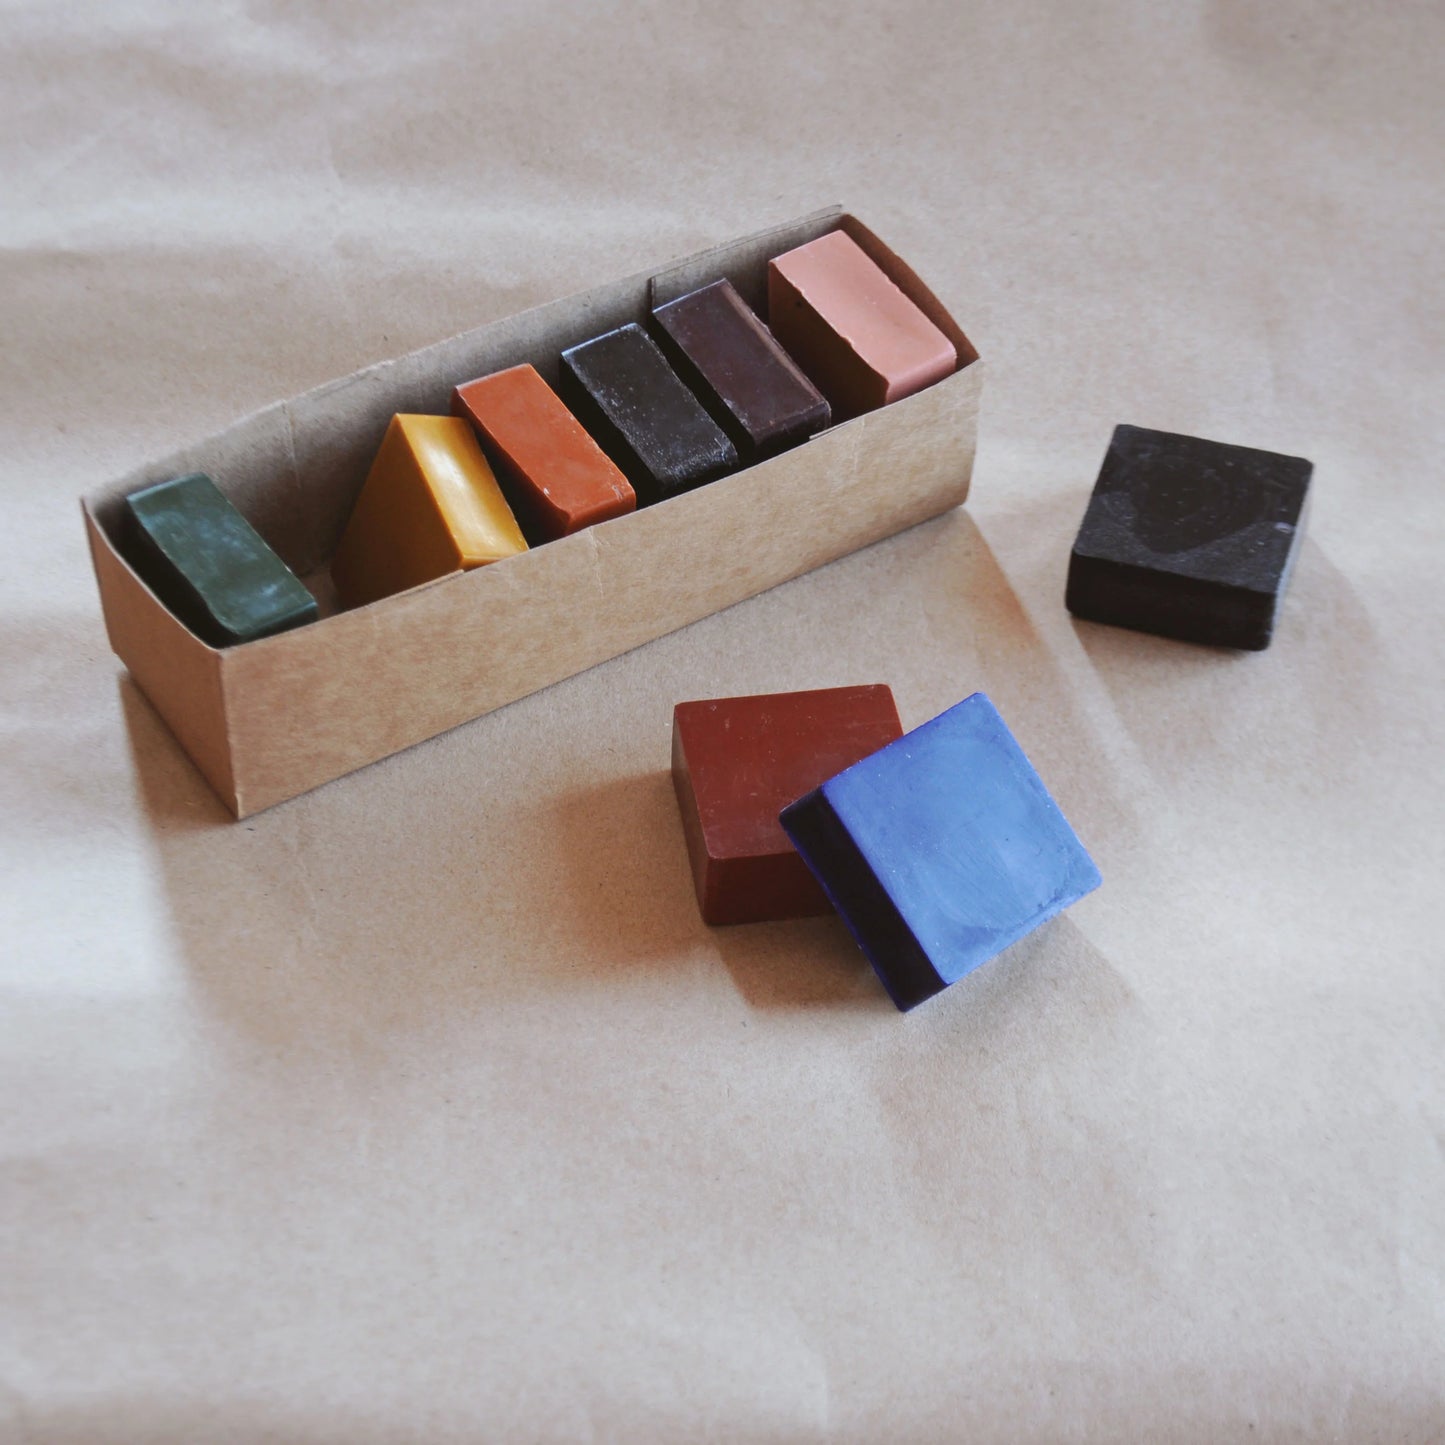 Non-toxic beeswax block crayons in a box